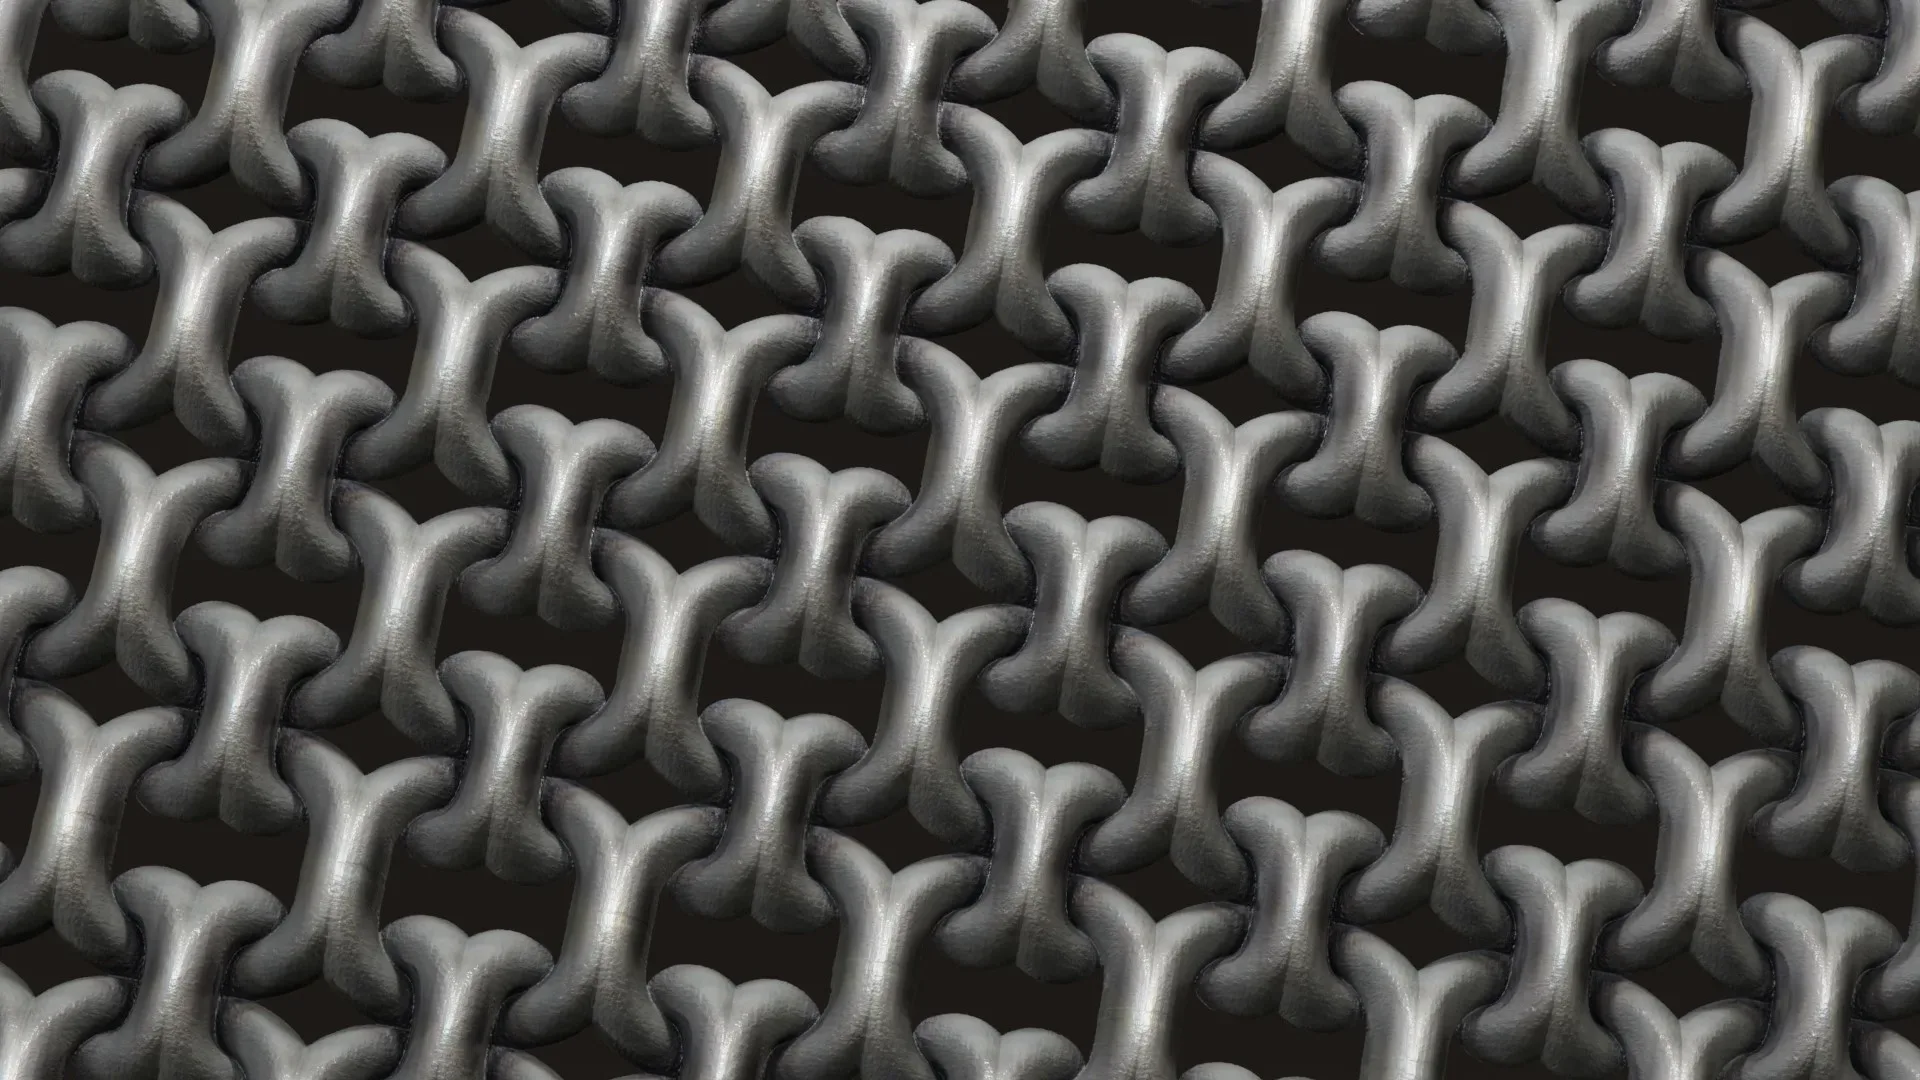 5x Seamless Chain Mail Textures